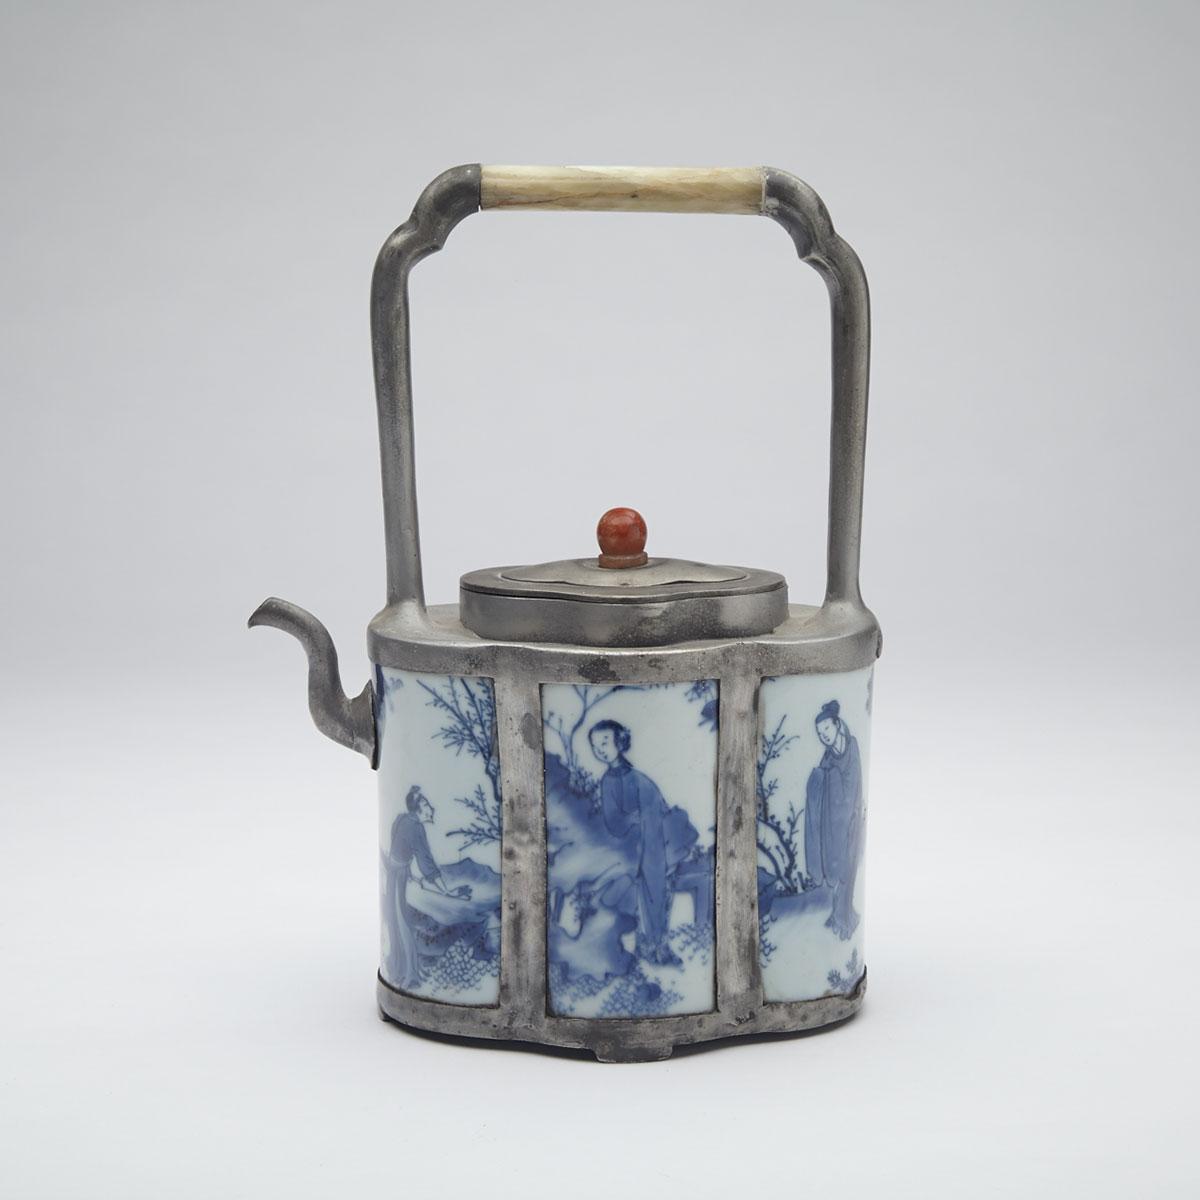 Blue and White Porcelain and Pewter Teapot, 17th Century